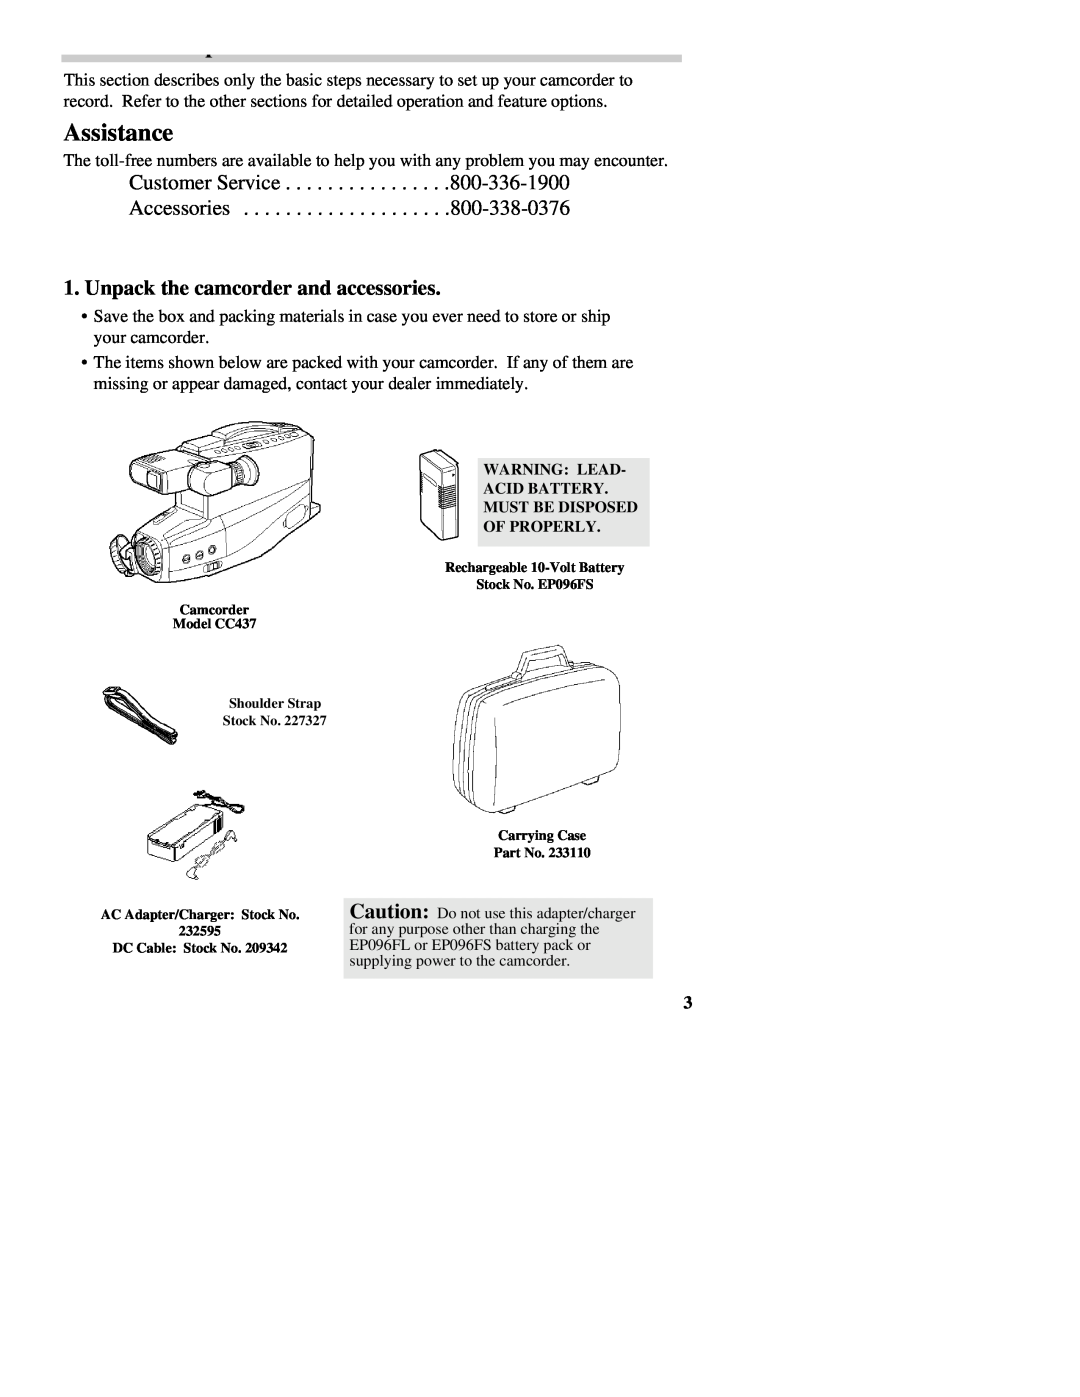 RCA CC437 manual Assistance, Customer Service Accessories, Unpack the camcorder and accessories 